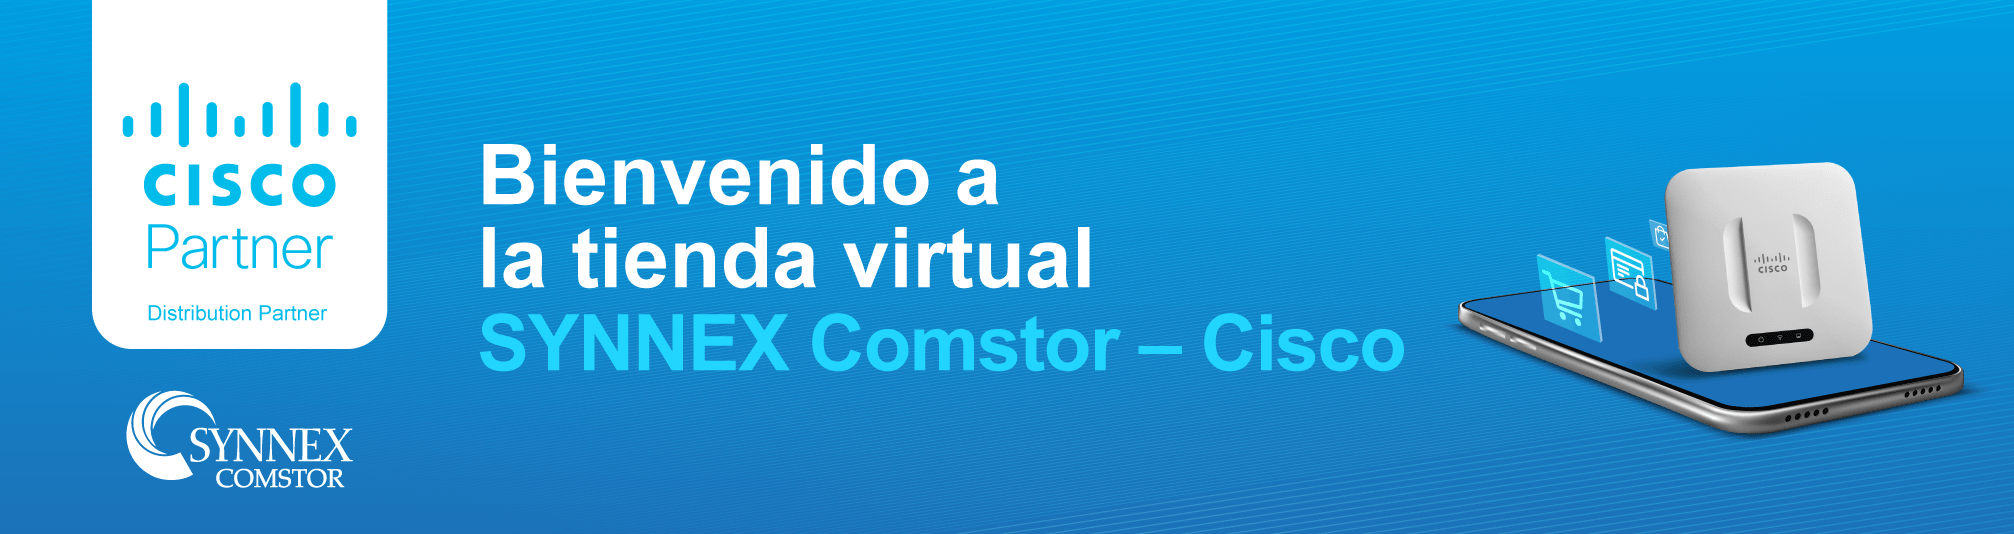 SYNNEX Comstor Express Colombia